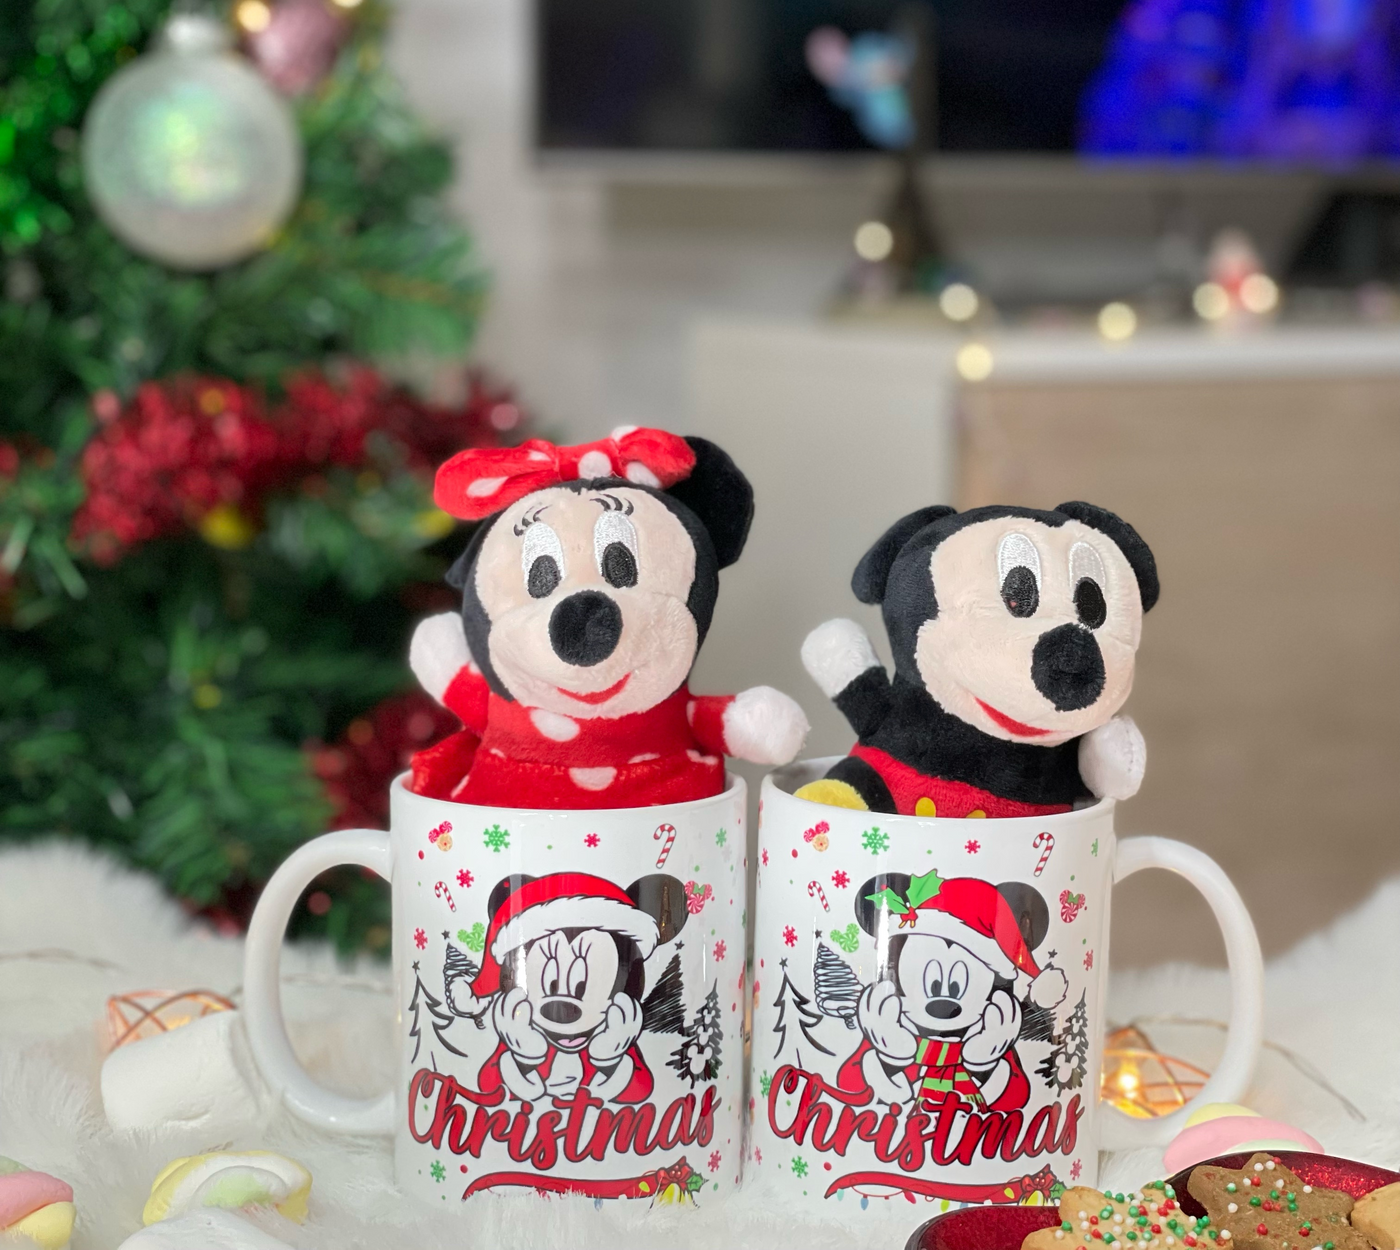 Pack Tazas Minnie y Mickey Mouse + Peluches